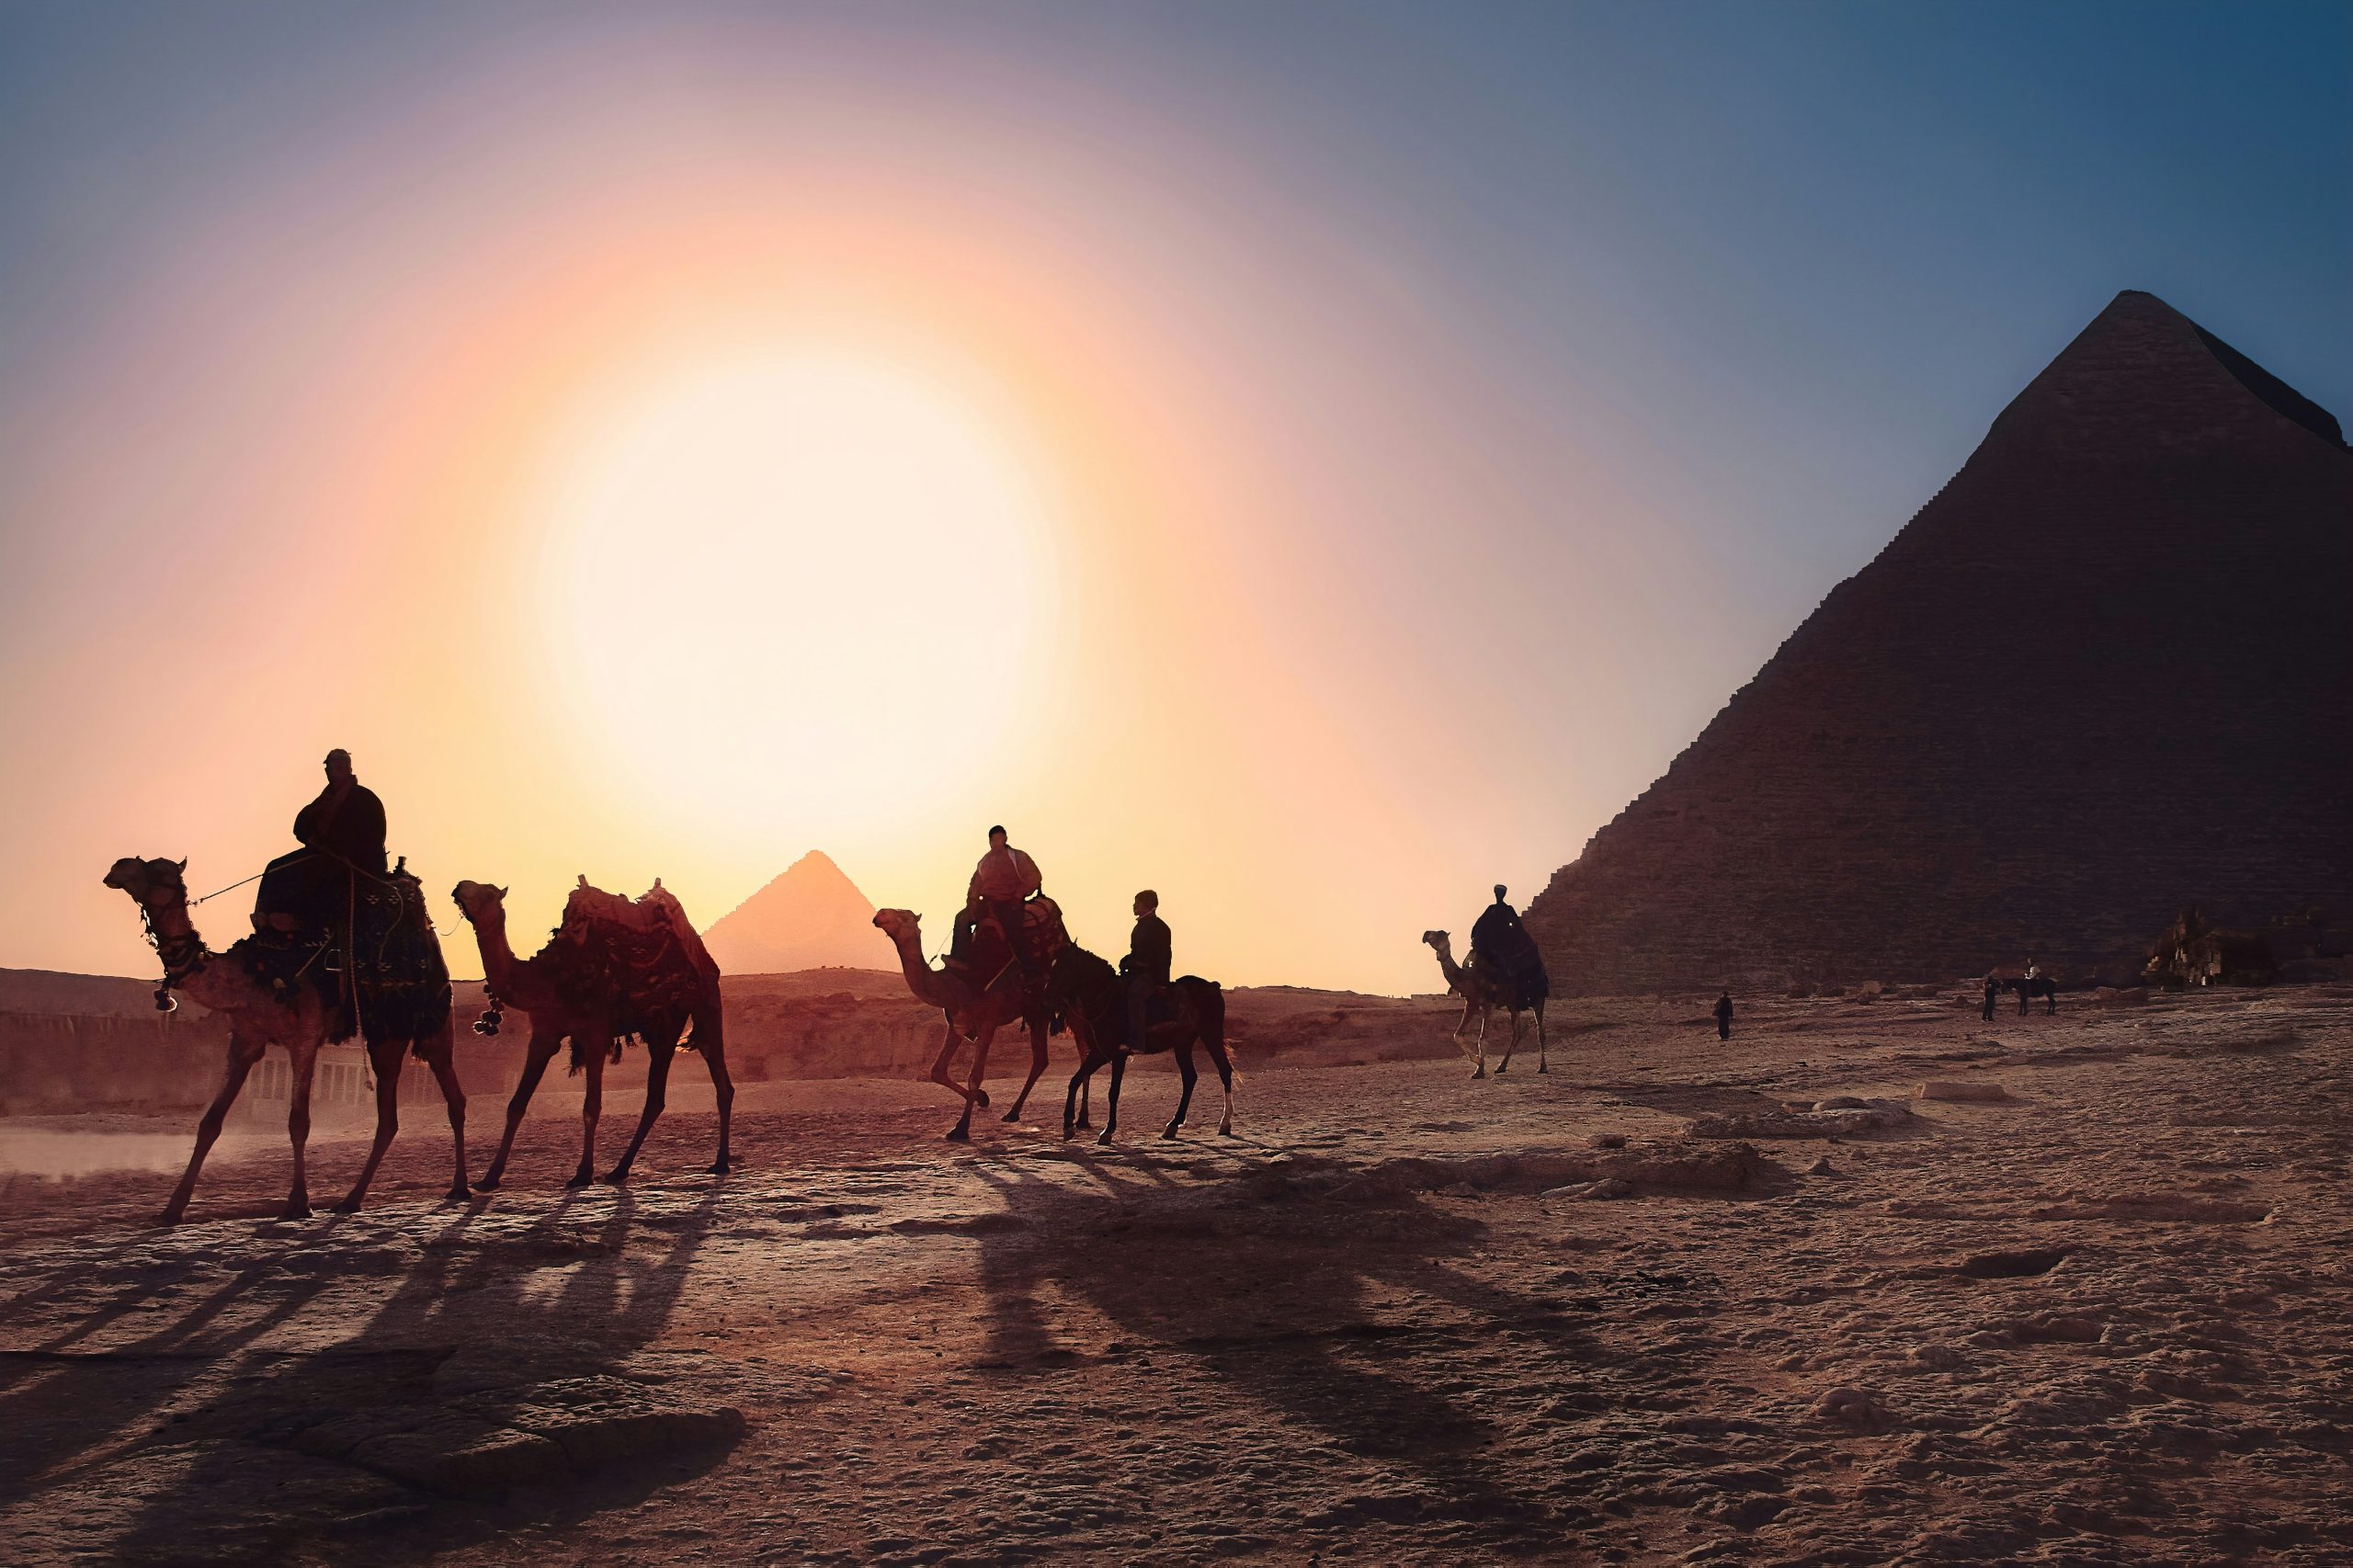 discover the history and mystery of pyramids from ancient civilizations around the world. explore the engineering marvel and cultural significance of these iconic structures.